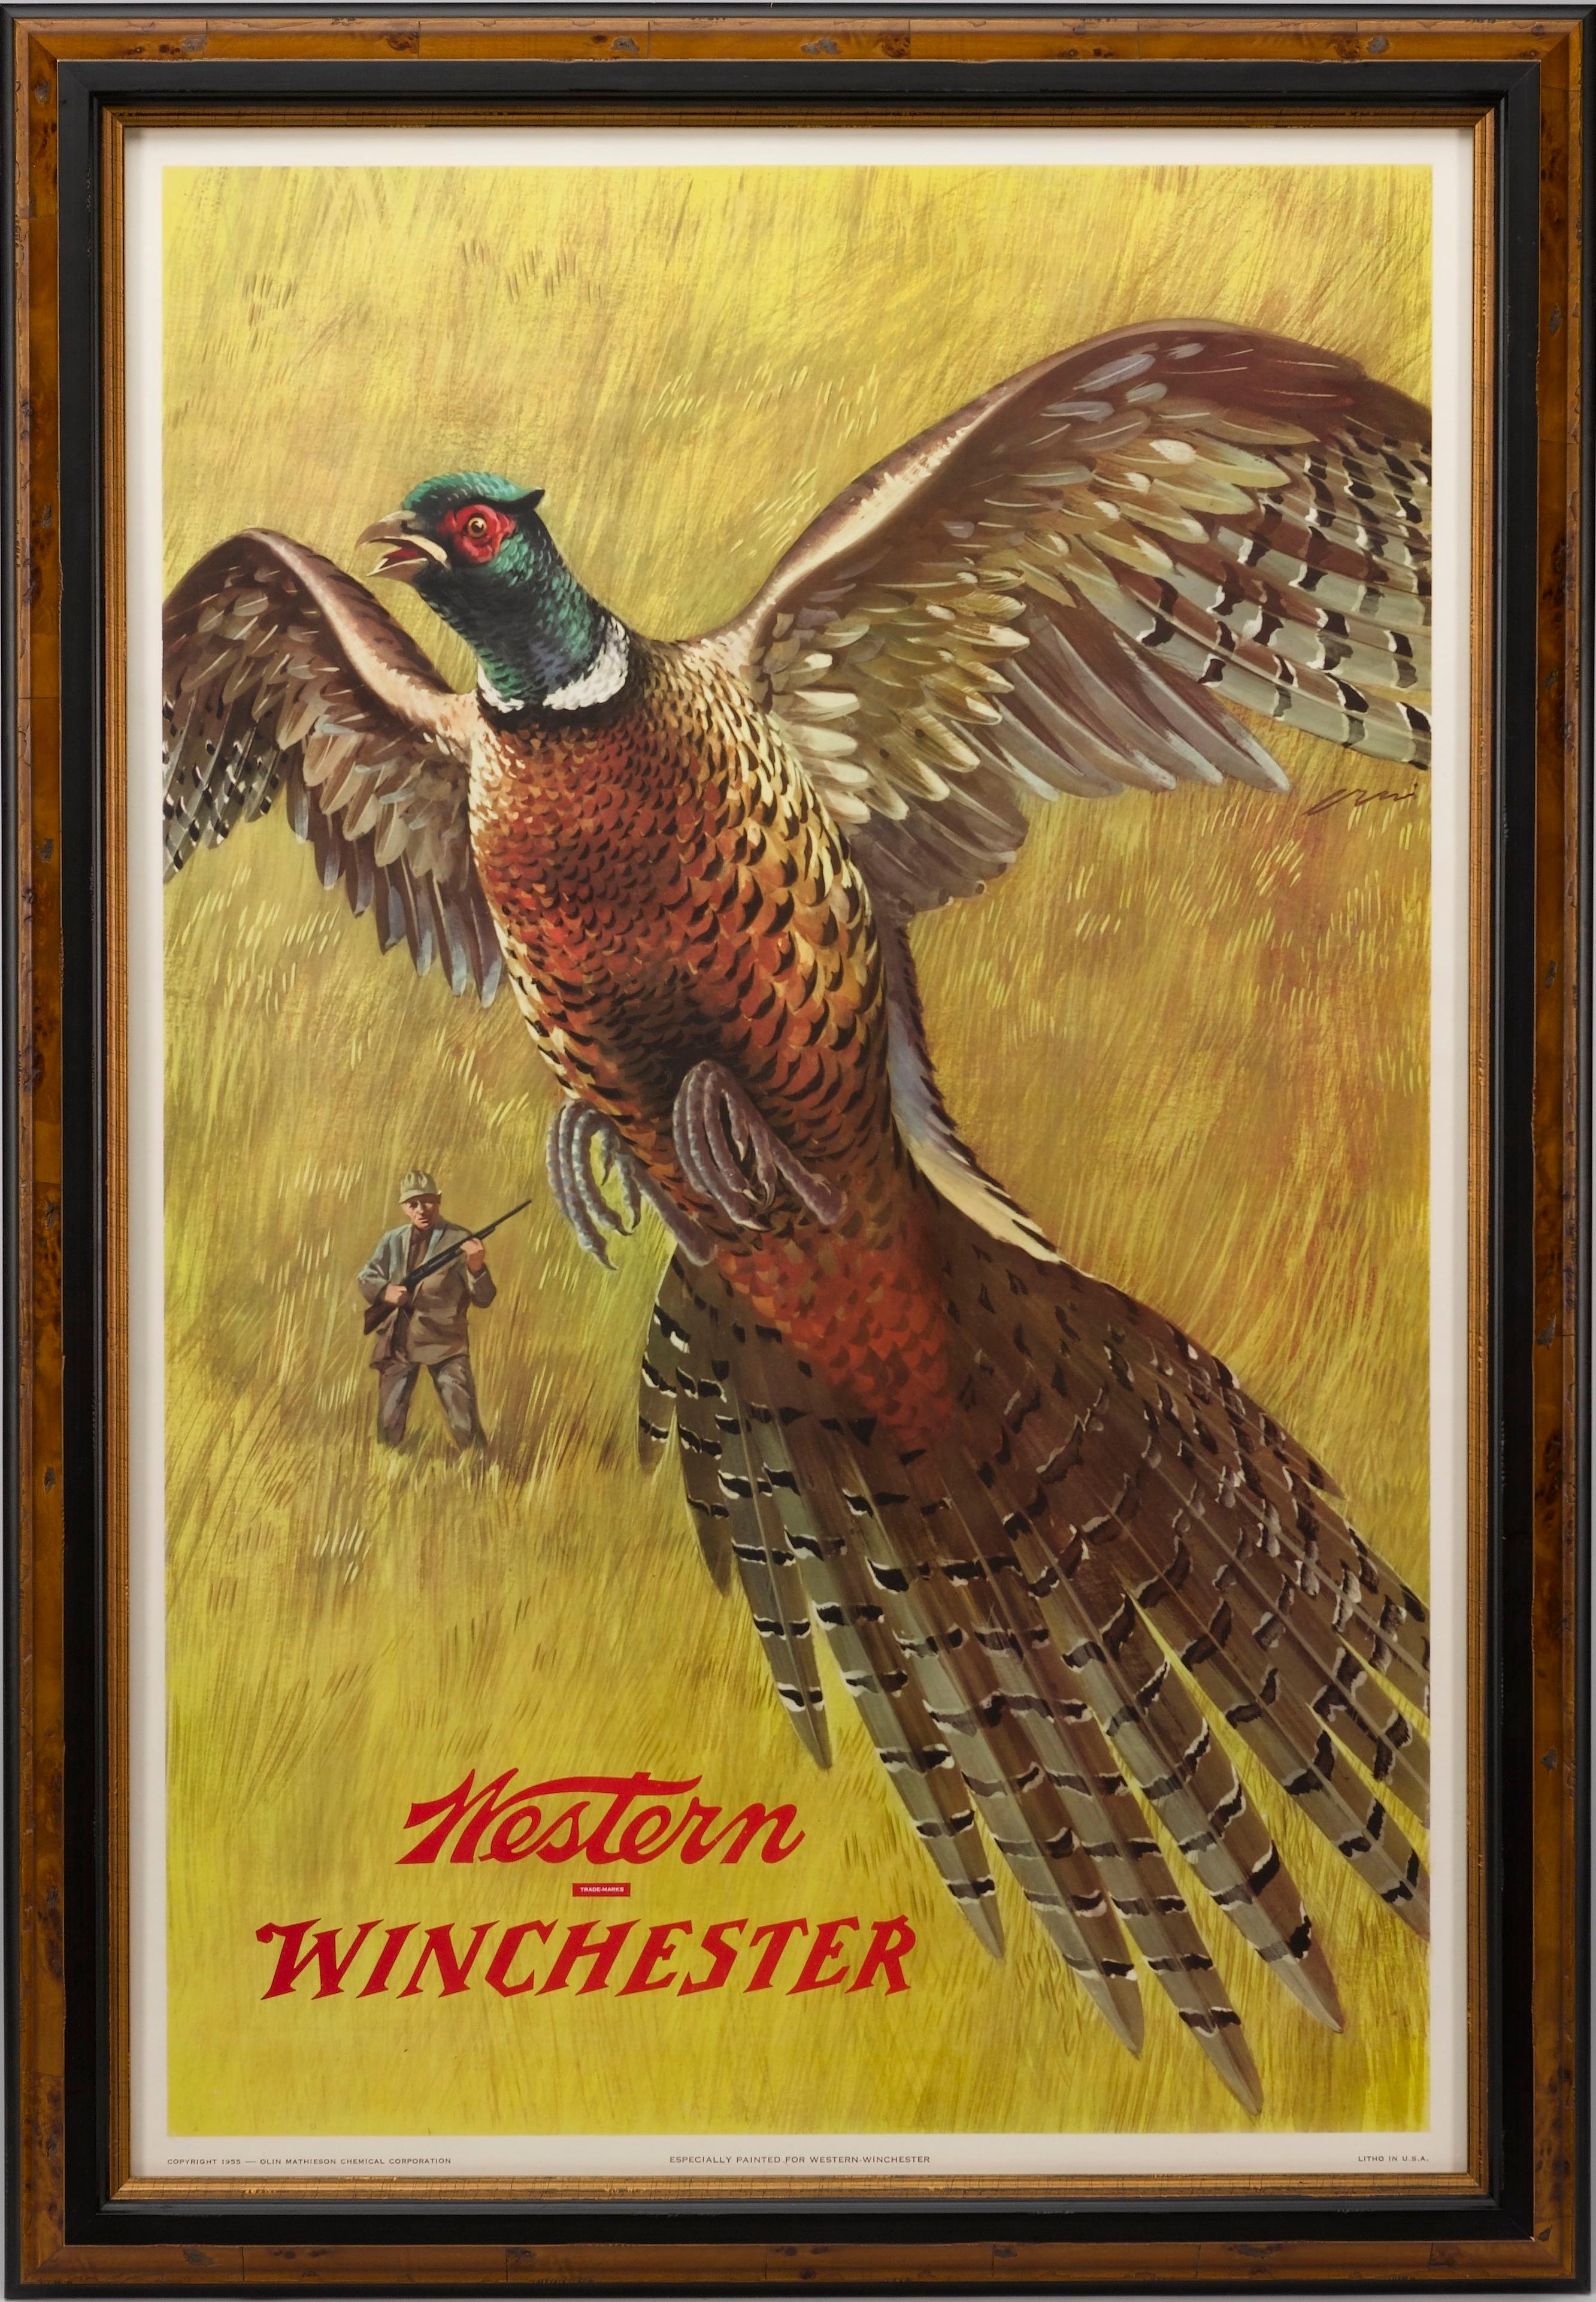 vintage winchester advertising poster